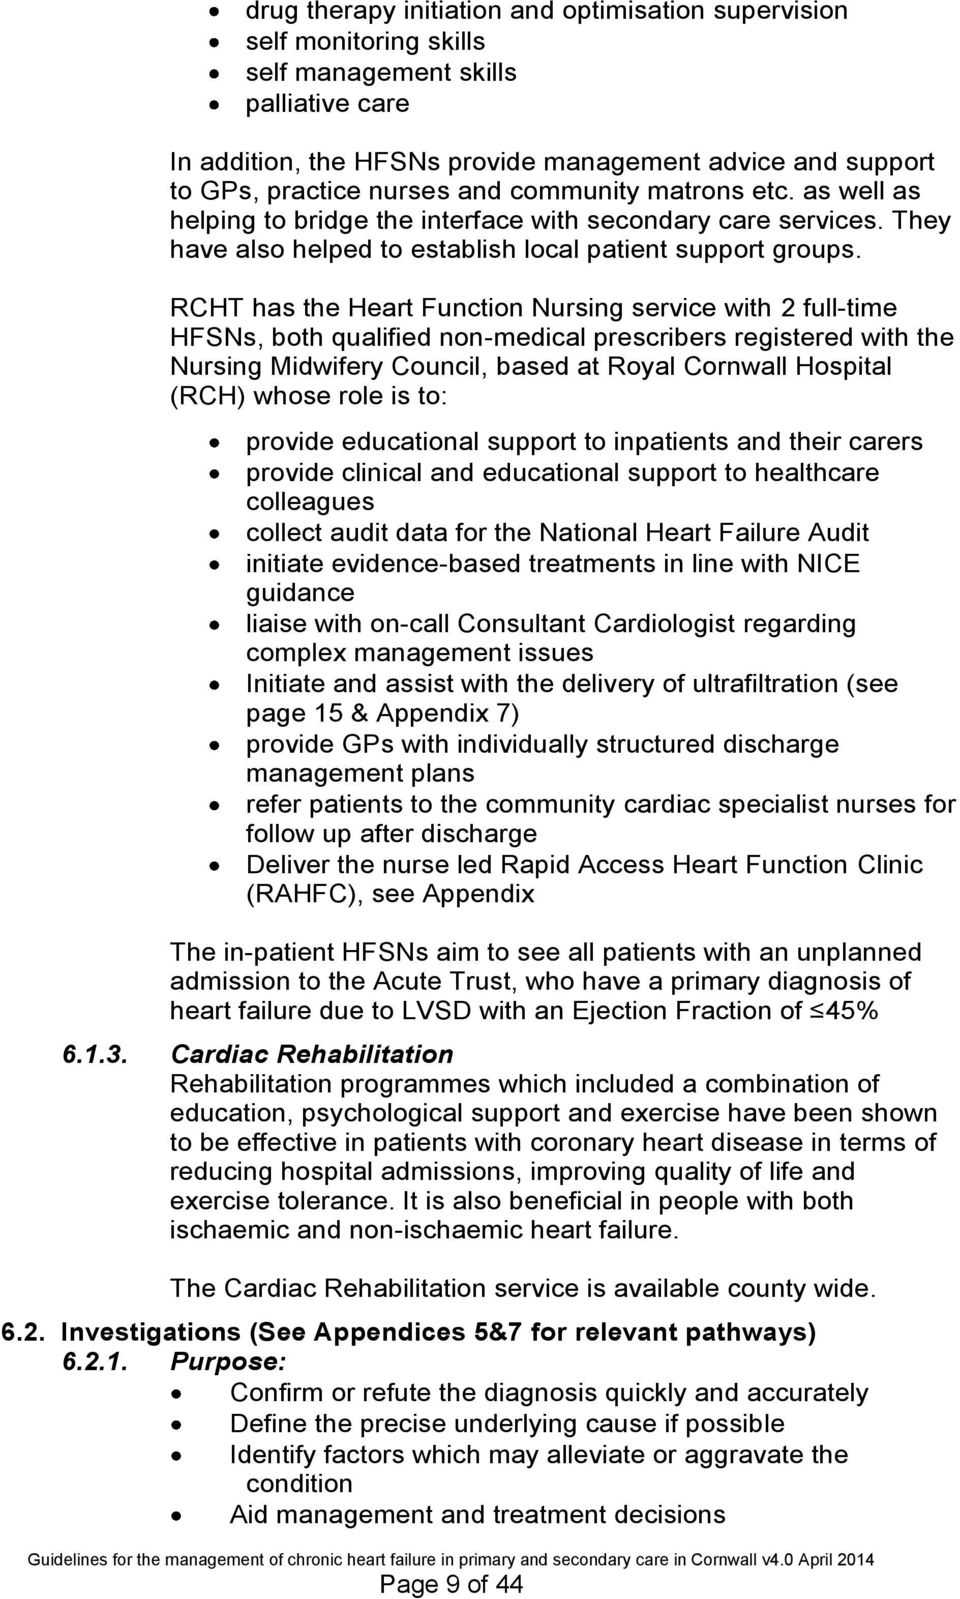 RCHT has the Heart Function Nursing service with 2 full-time HFSNs, both qualified non-medical prescribers registered with the Nursing Midwifery Council, based at Royal Cornwall Hospital (RCH) whose